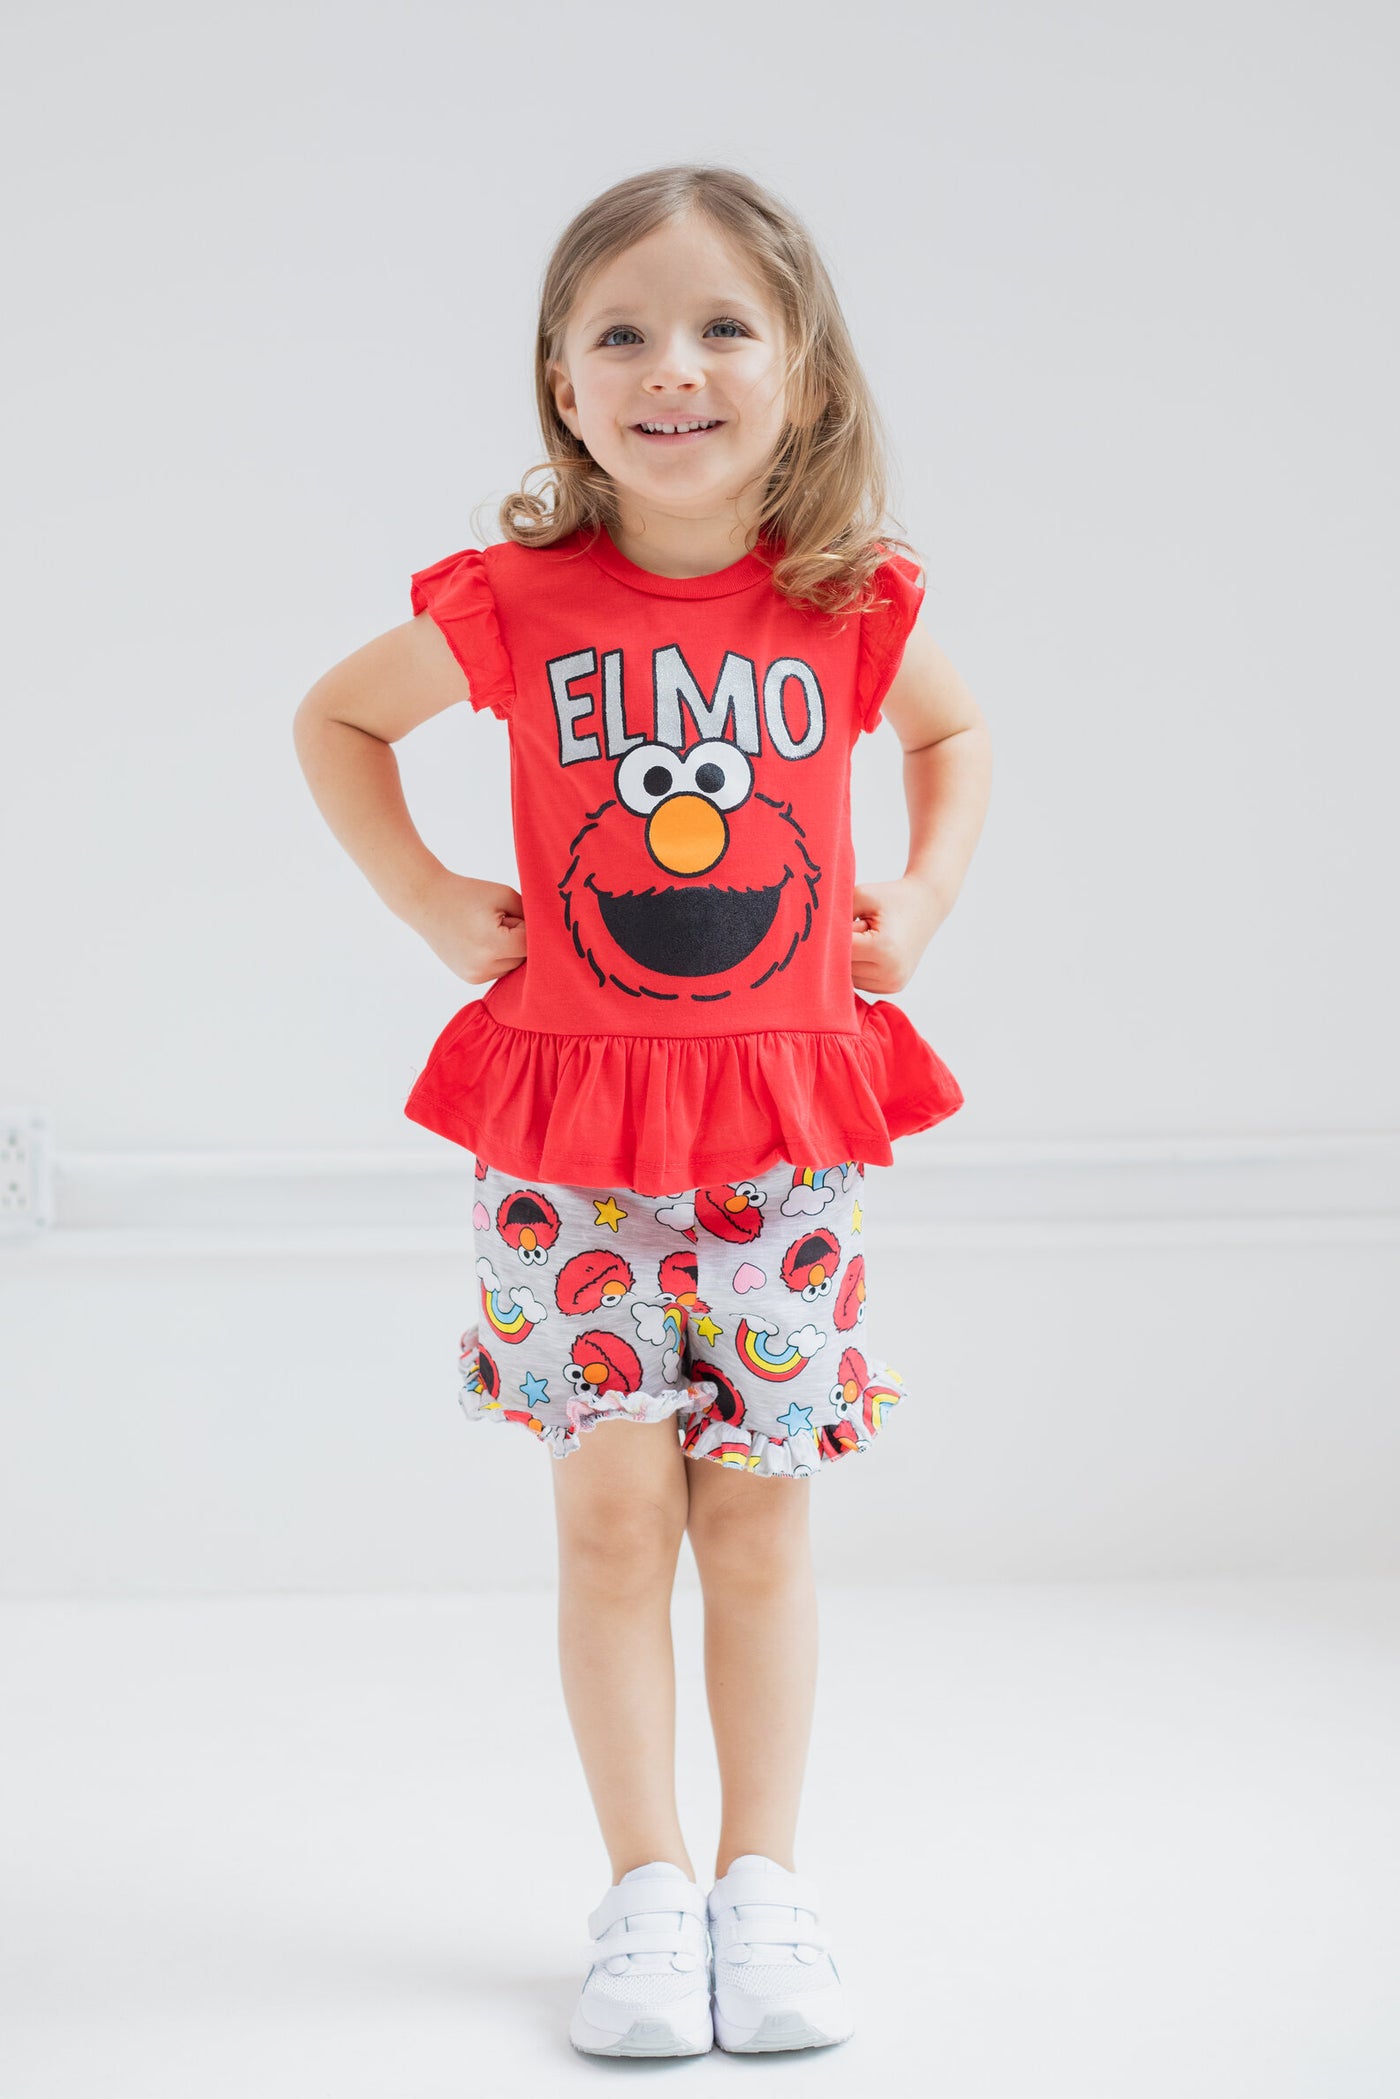 Sesame Street Elmo Peplum T-Shirt and French Terry Shorts Outfit Set